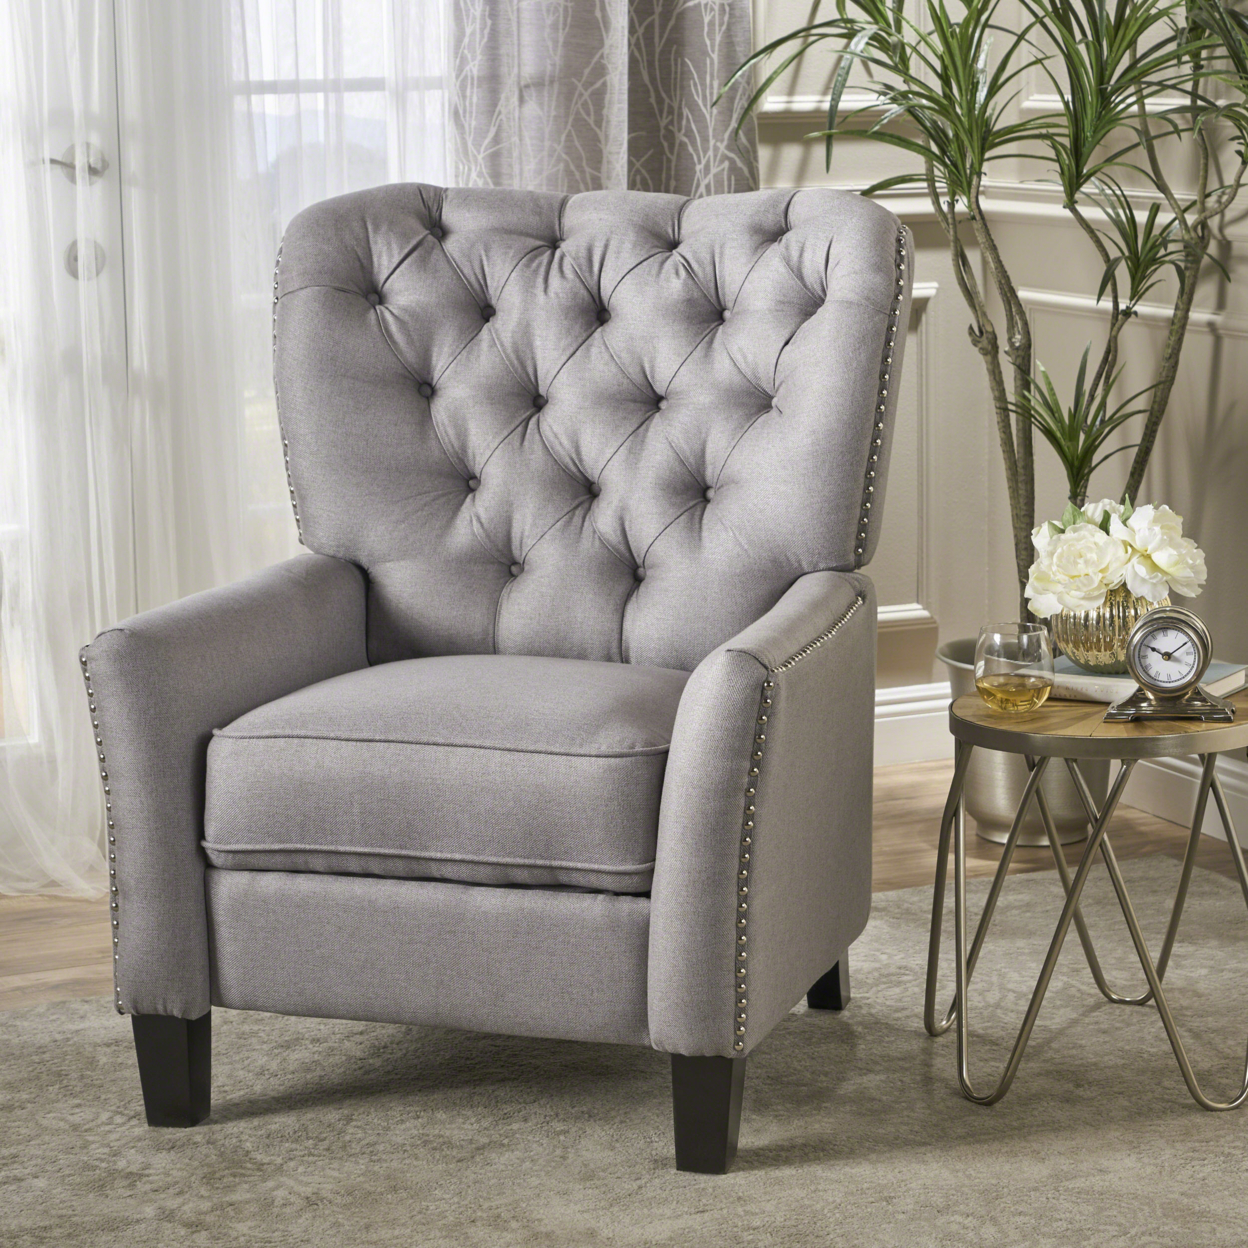 Carlyle Tufted Back Fabric Recliner Armchair - Light Gray